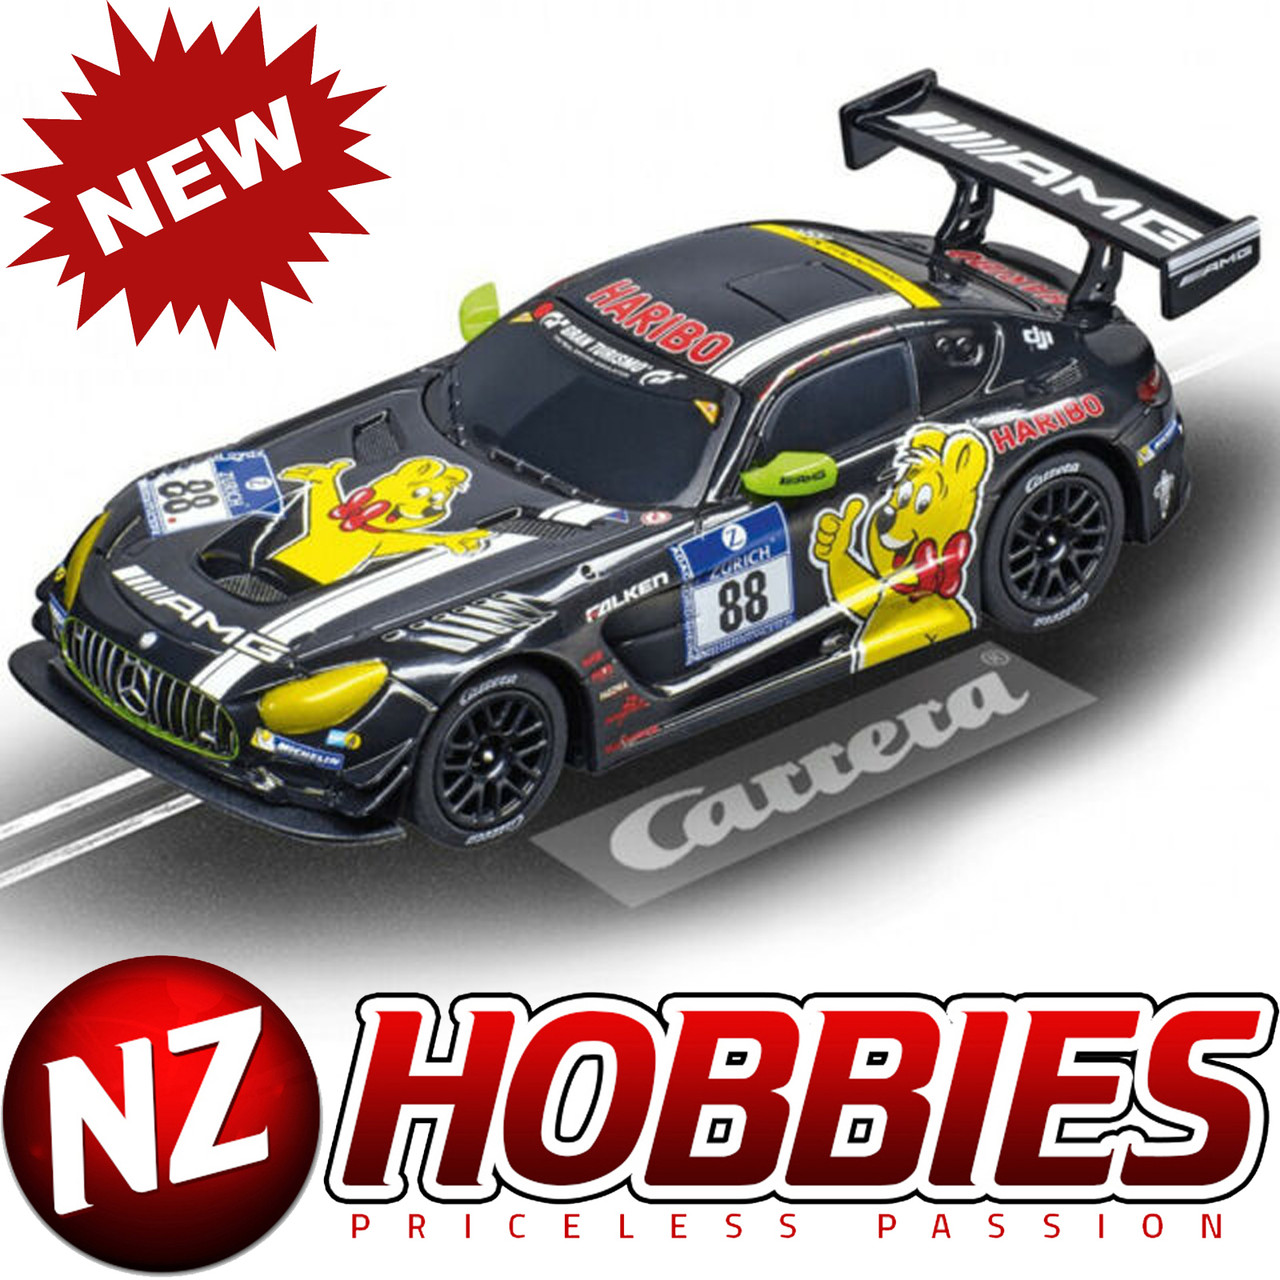 MERCEDES AMG Gt3 Haribo 88 Carrera Go 1/43 Scale Slot Car 20064116 for sale online